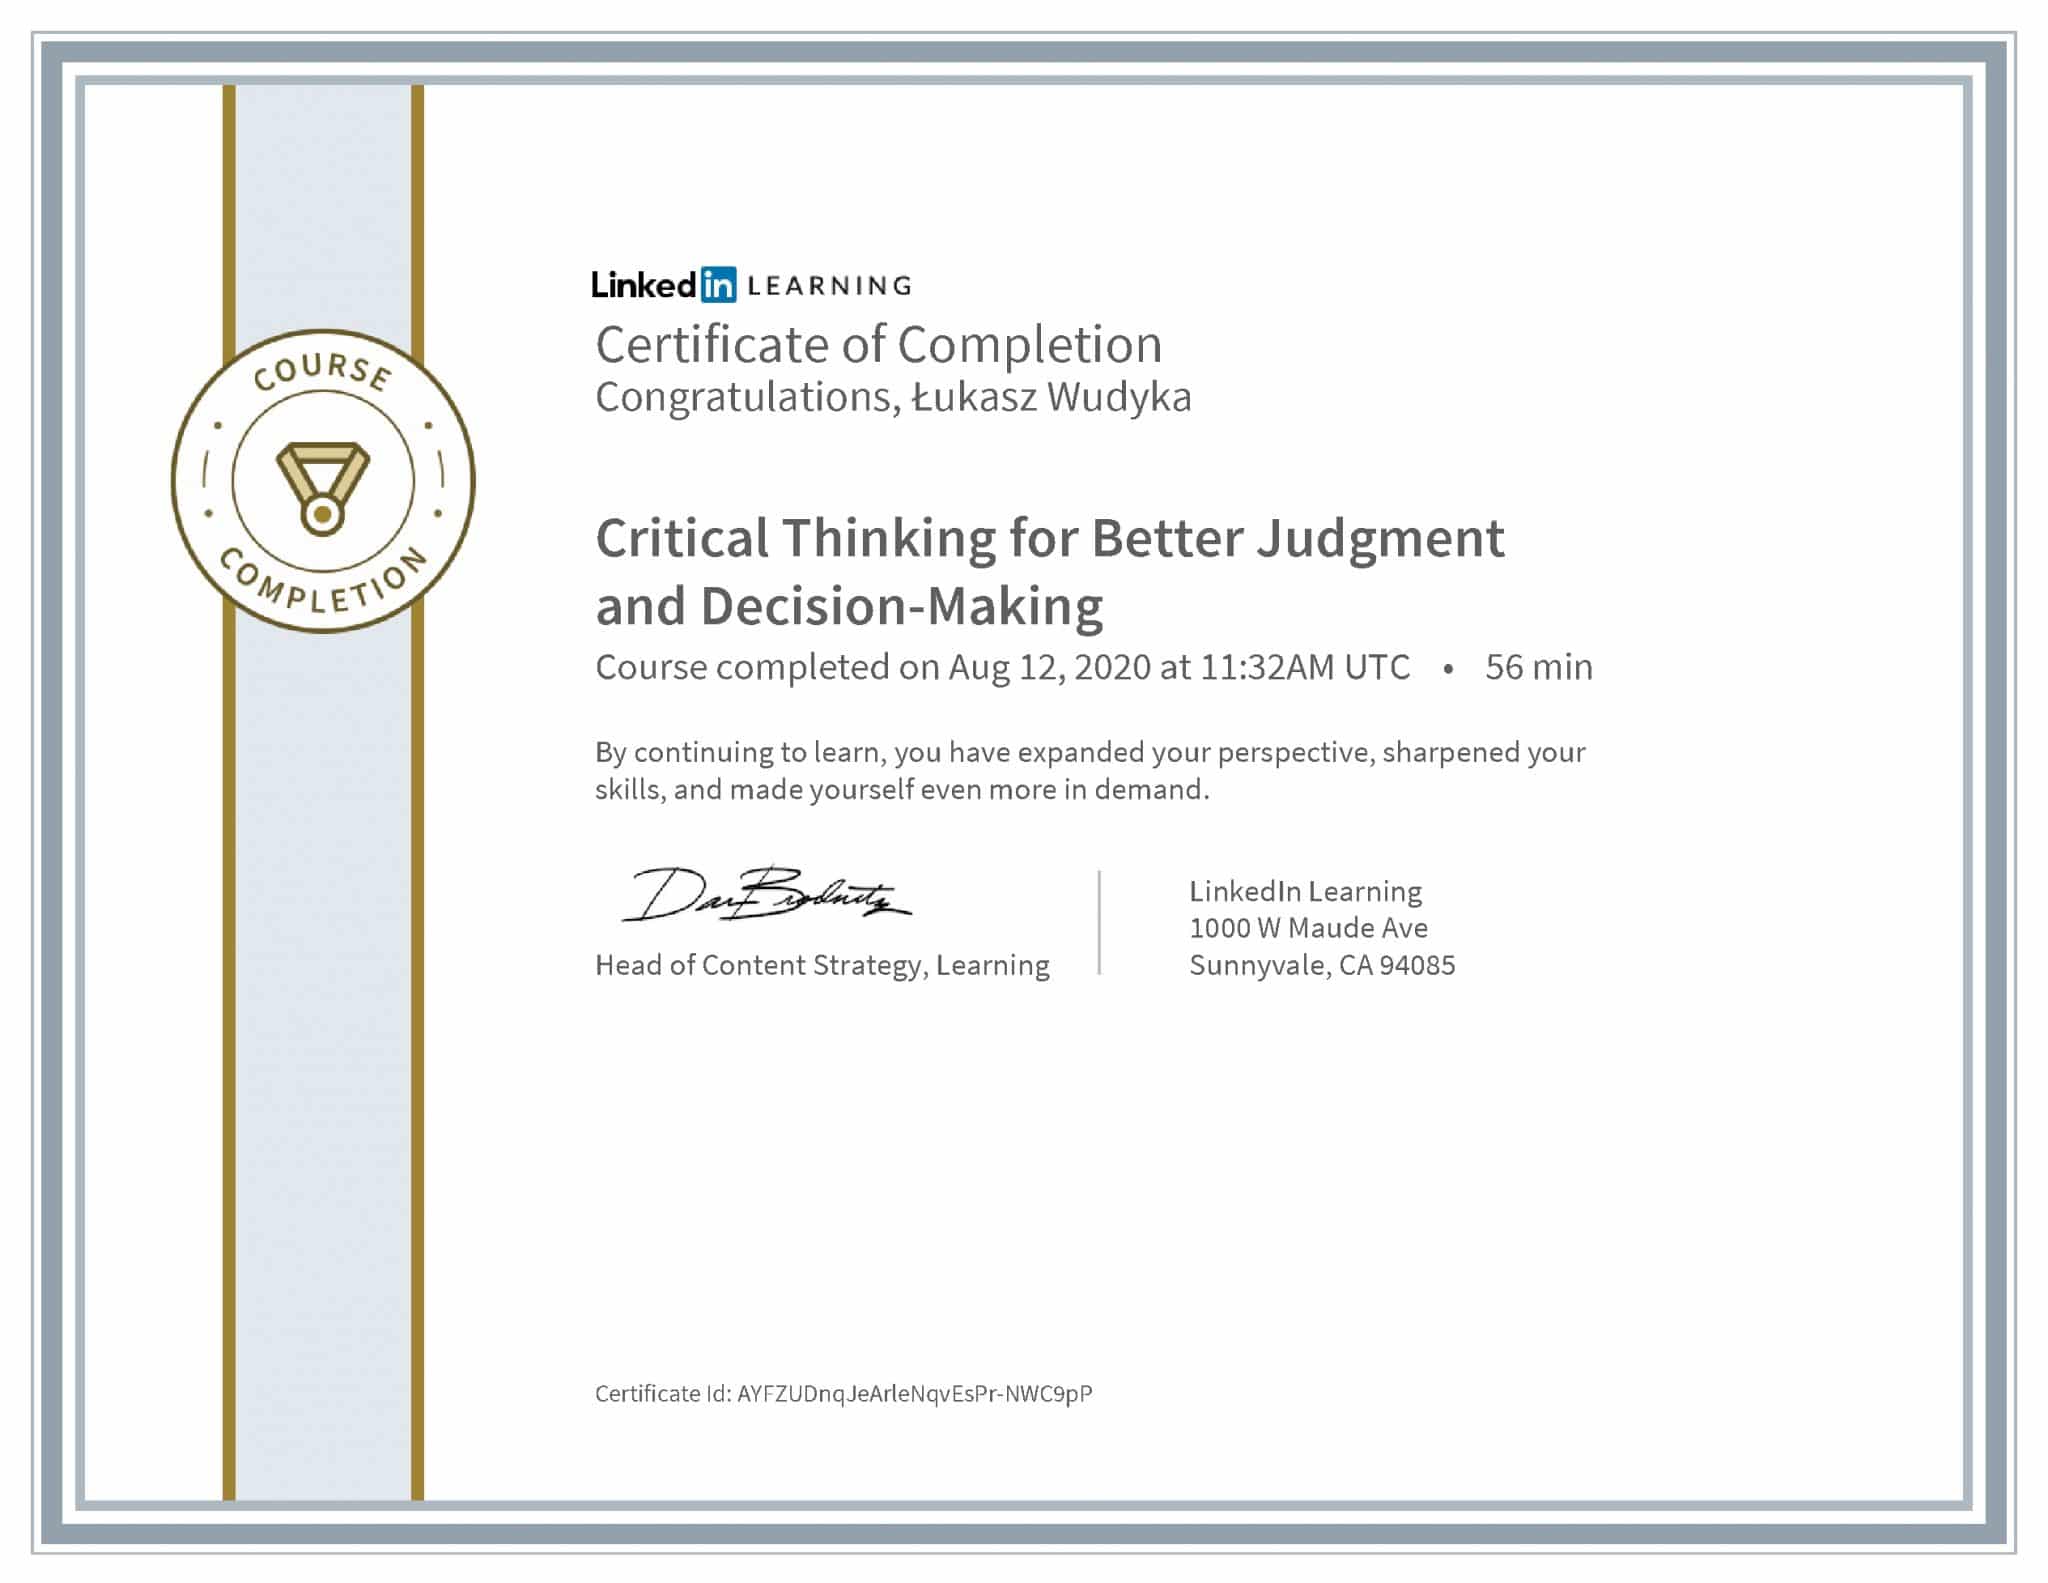 Łukasz Wudyka certyfikat LinkedIn Critical Thinking for Better Judgment and Decision-Making